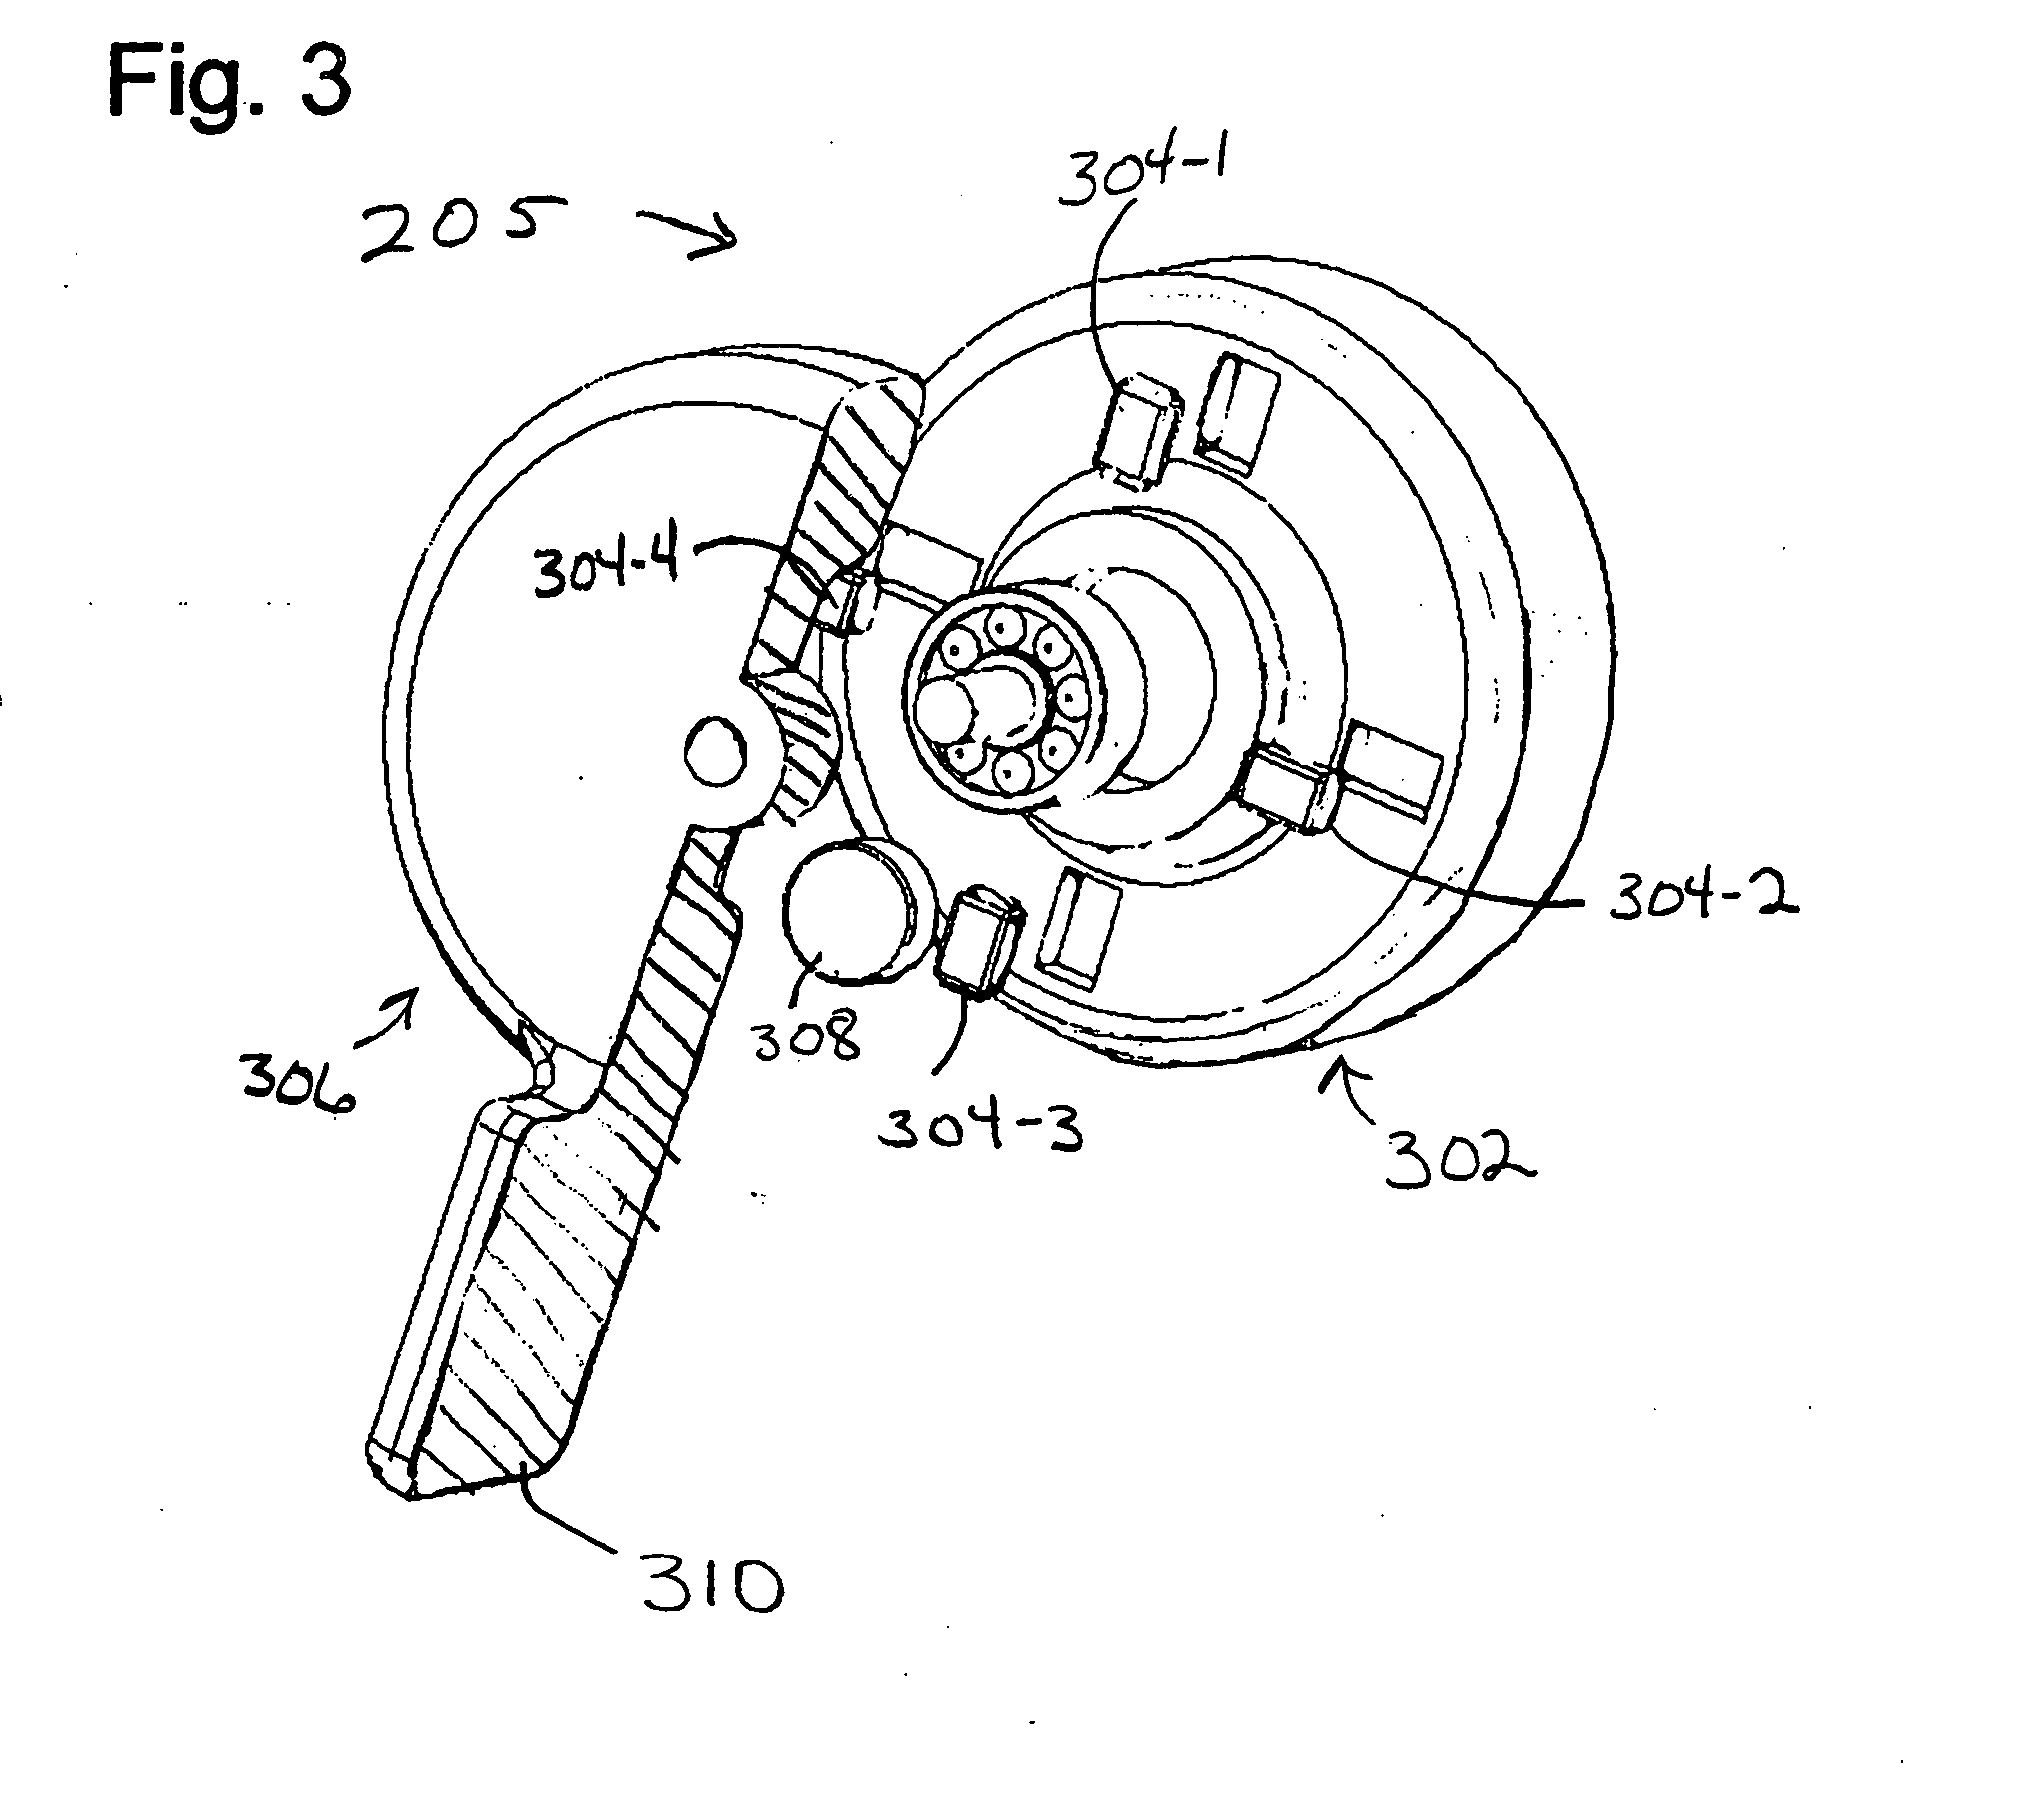 Power transmission monitoring and maintenance systems and methods